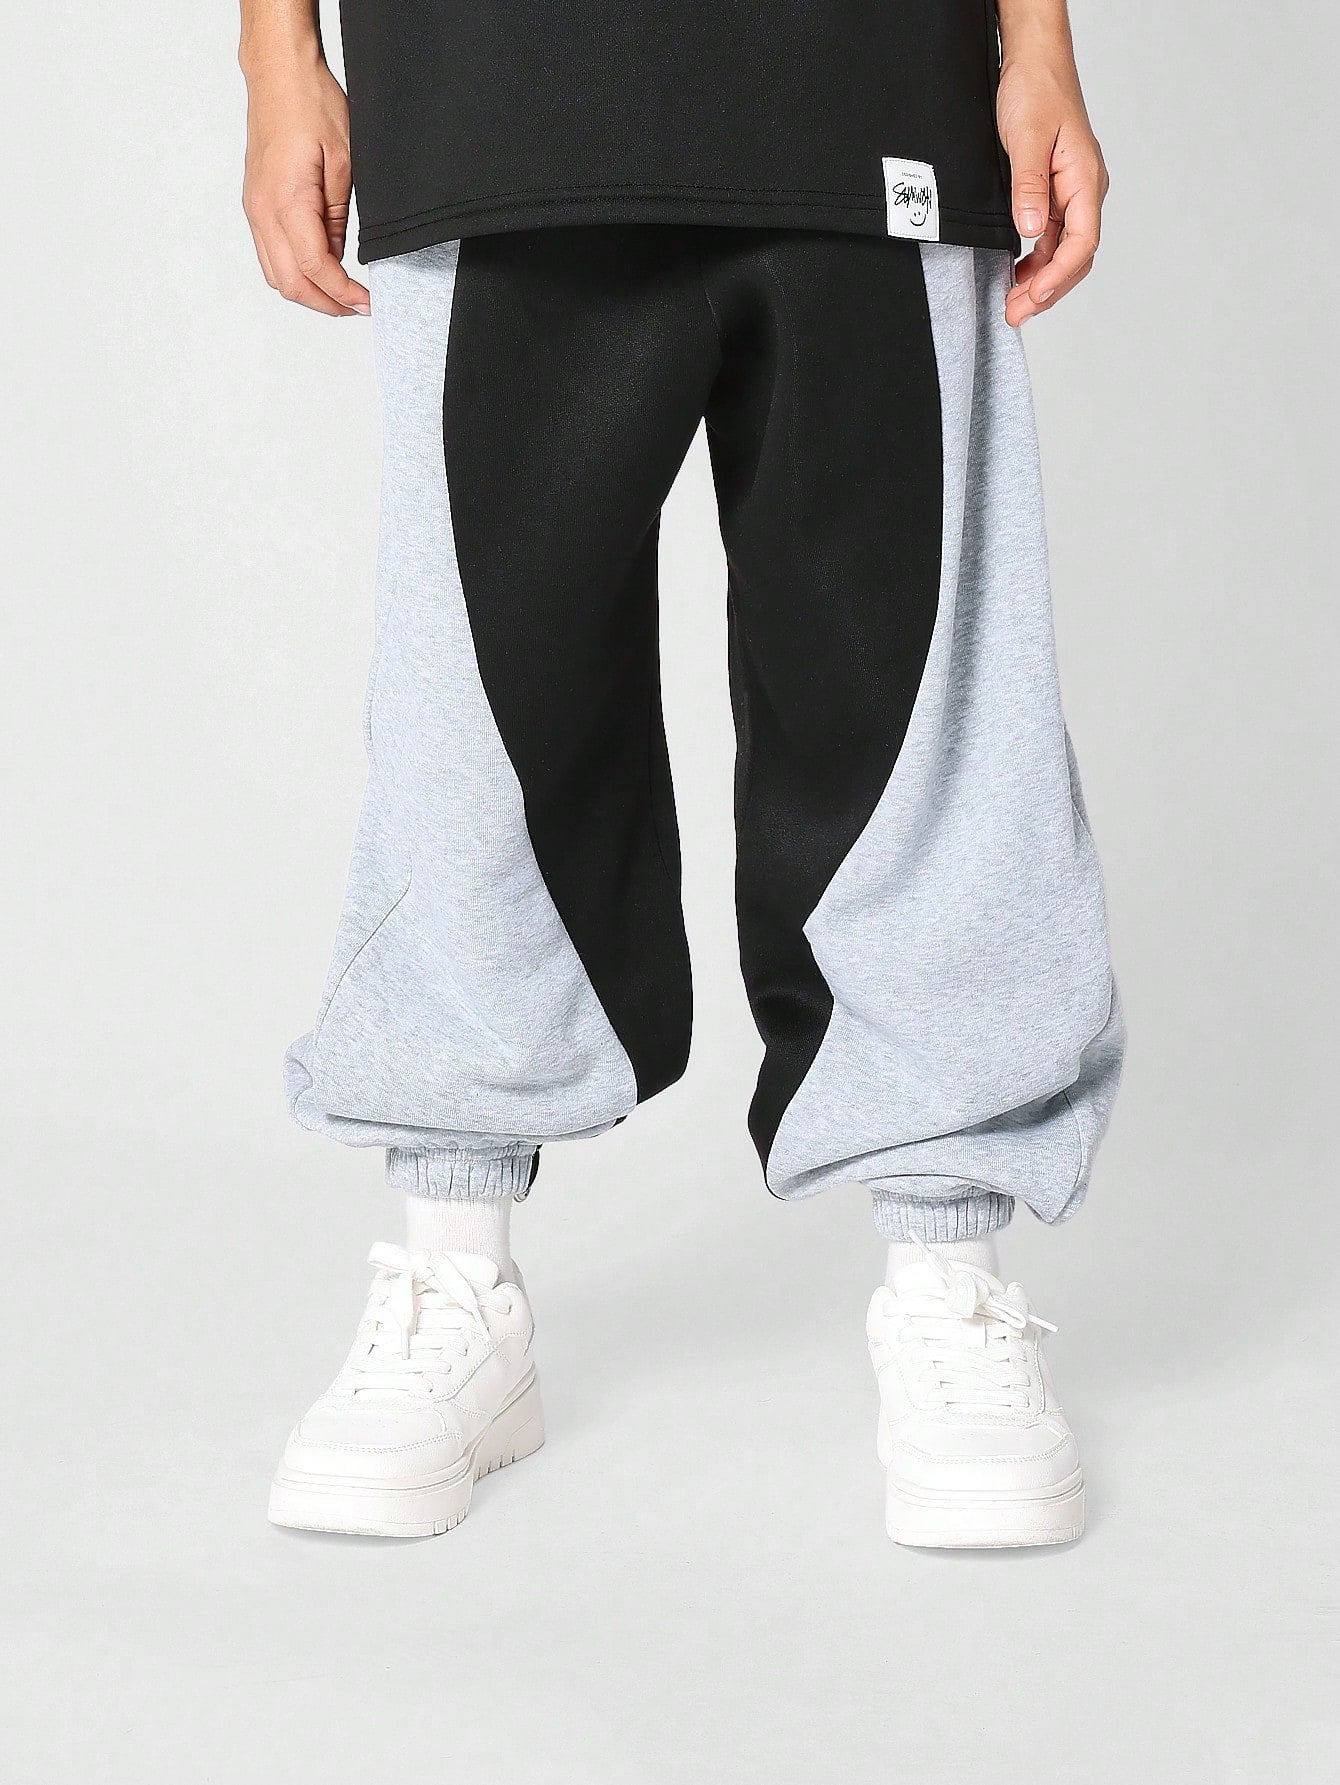 Kids Unisex 90s Jogger With Contrast Panels